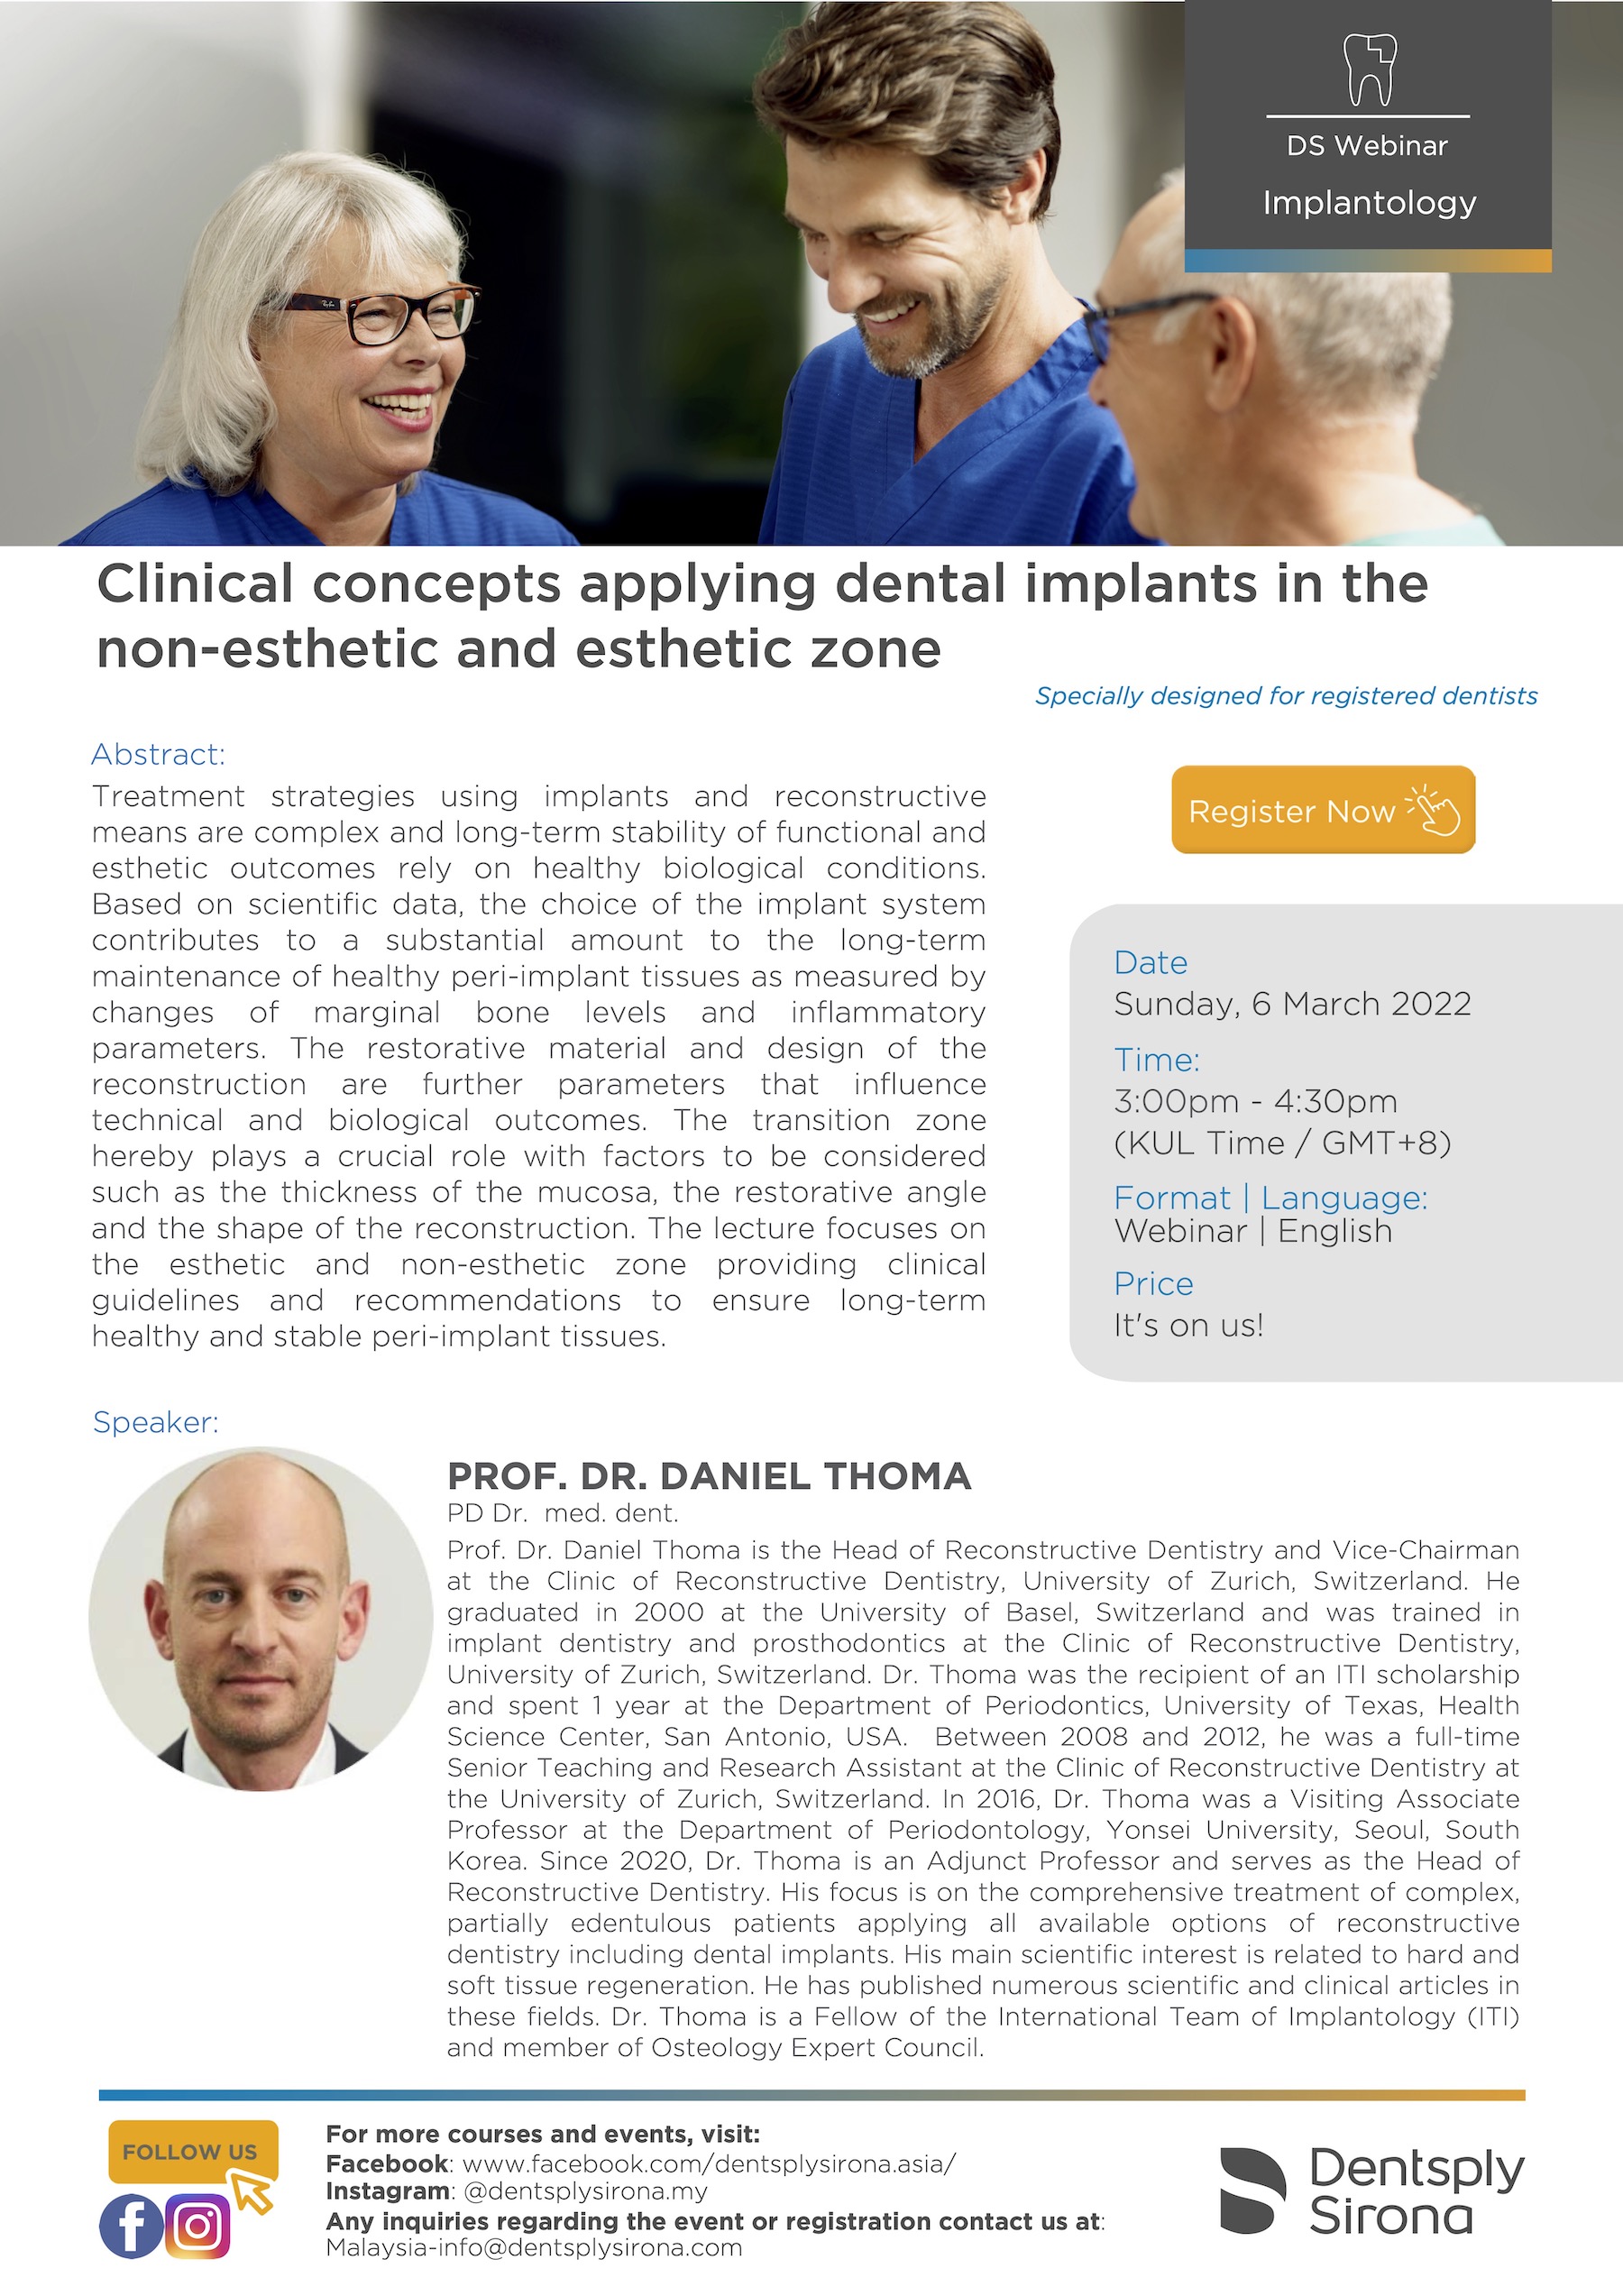 Clinical concepts applying dental implants in the non-esthetic and esthetic zone Flyer